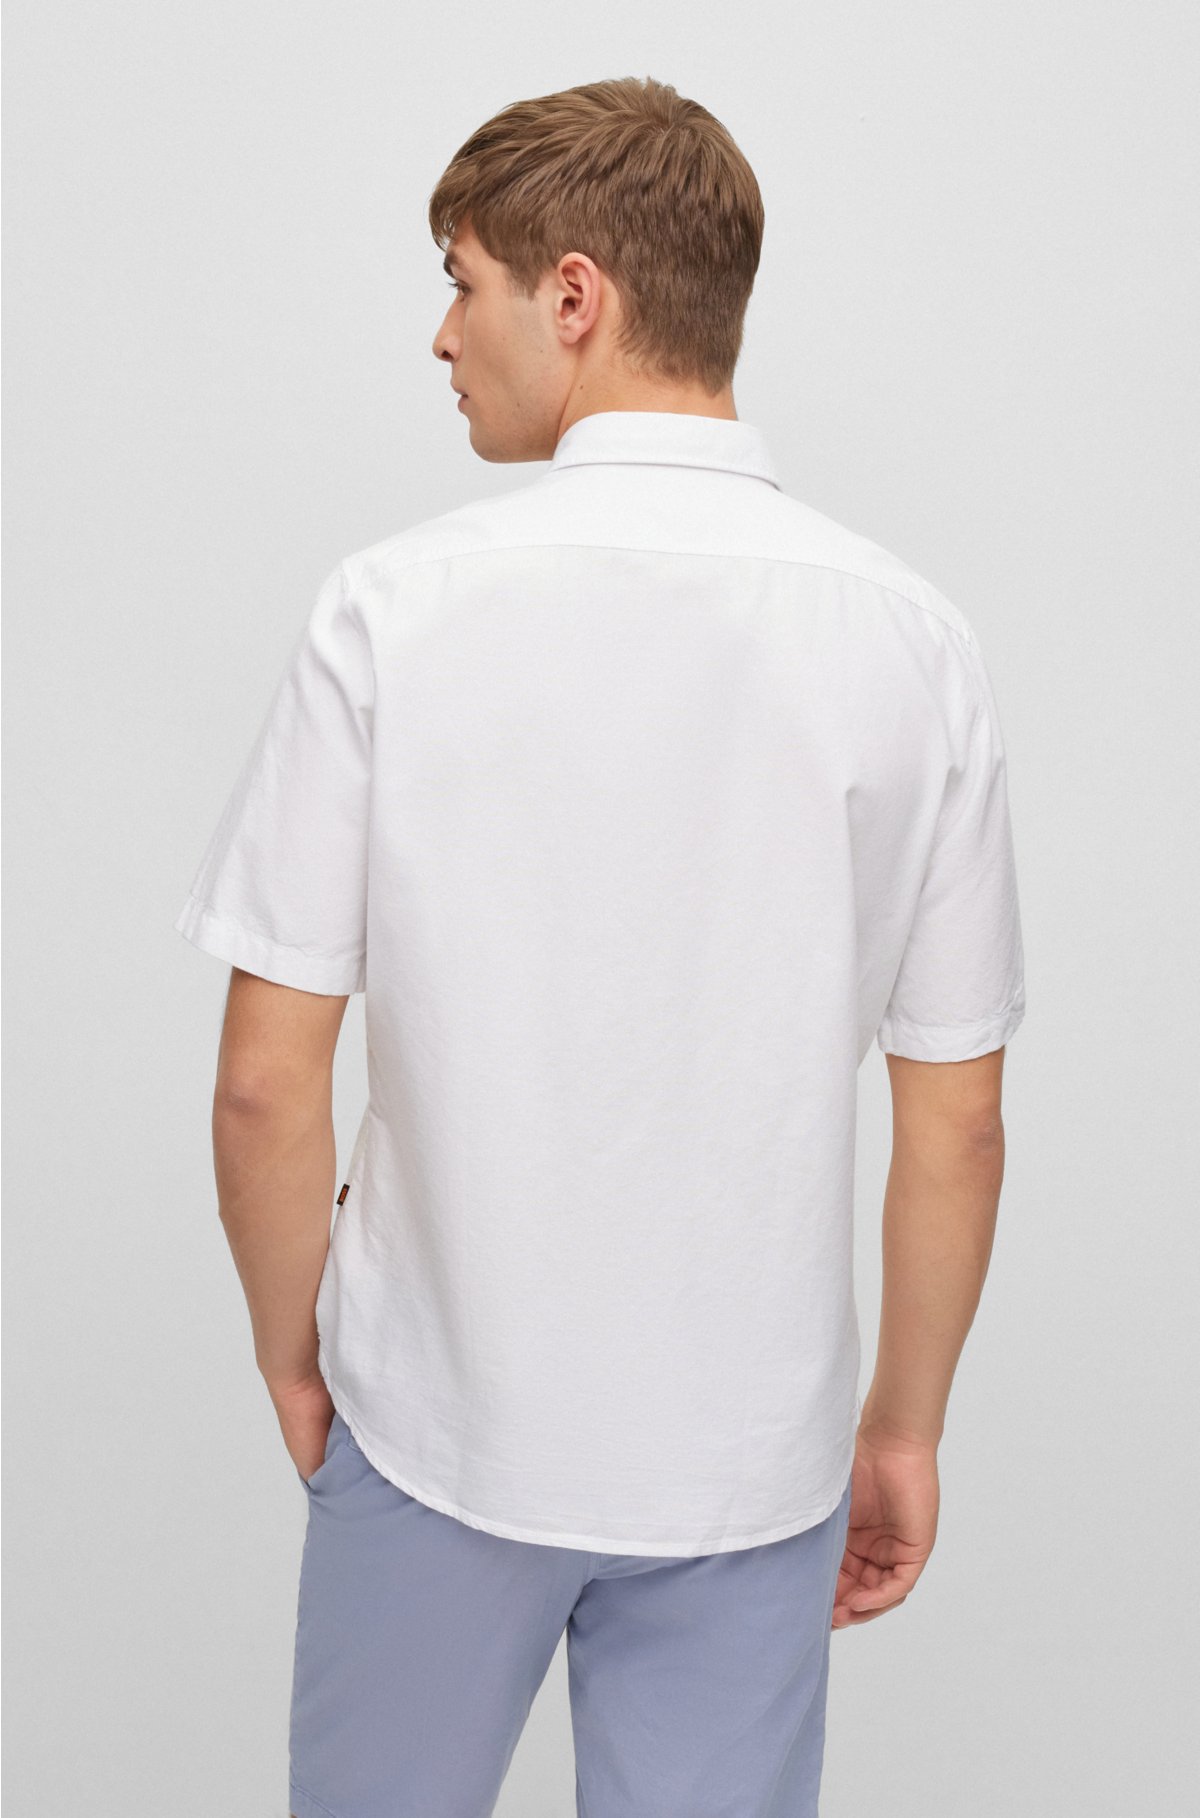 Regular-fit shirt in Oxford cotton, White